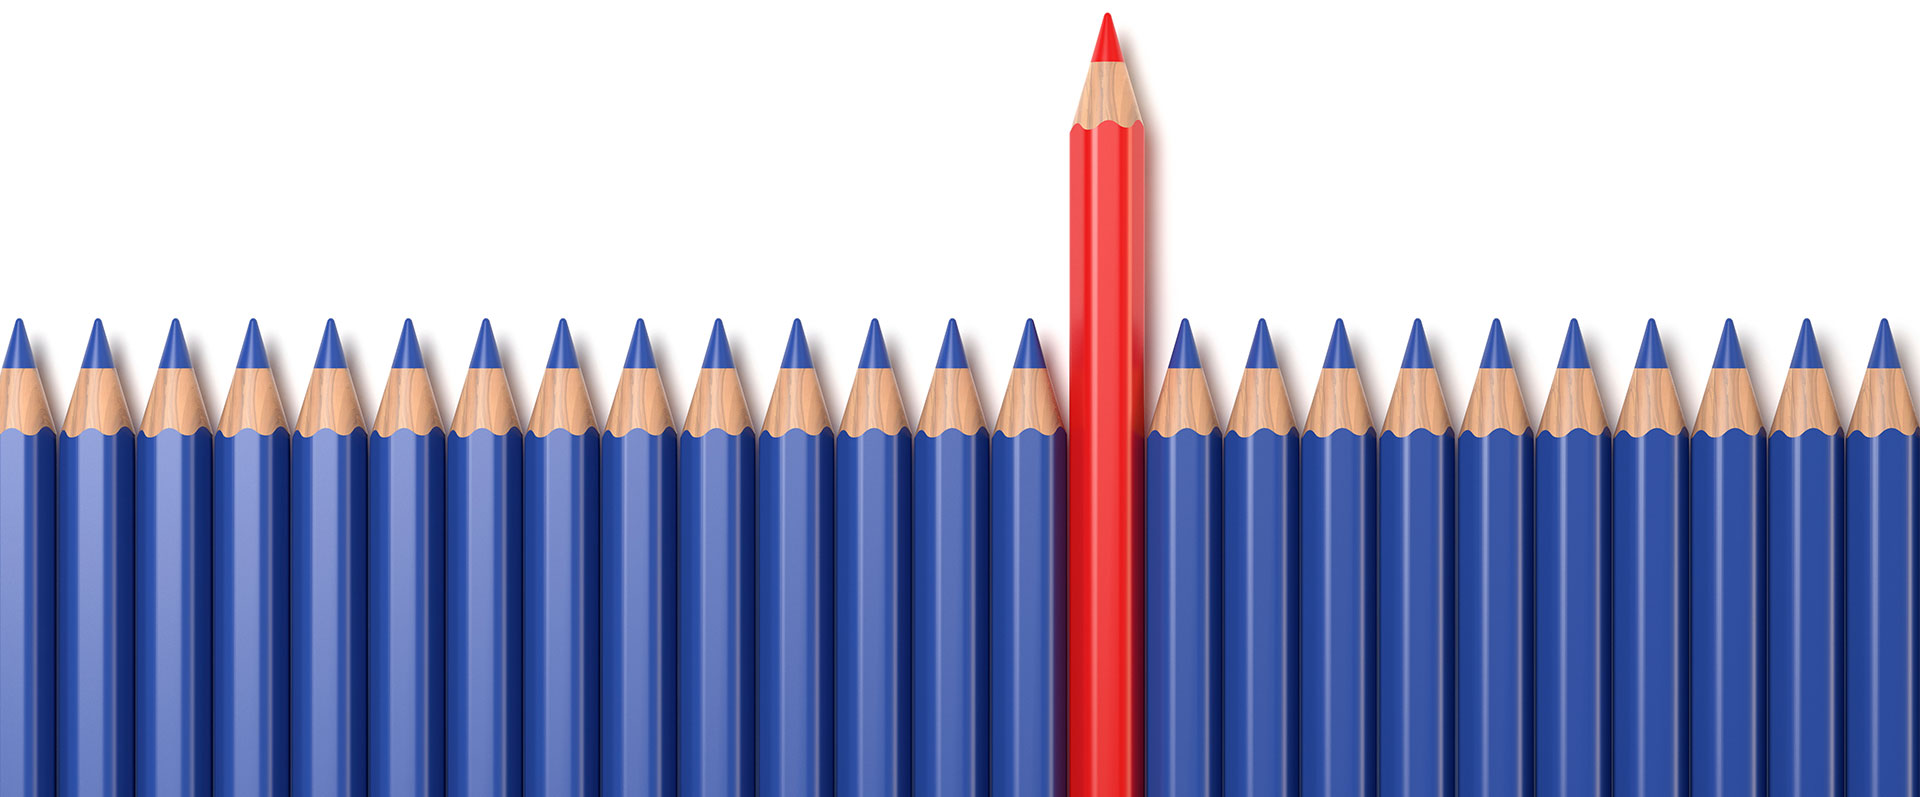 Row of blue penicls with one red pencil sticking up